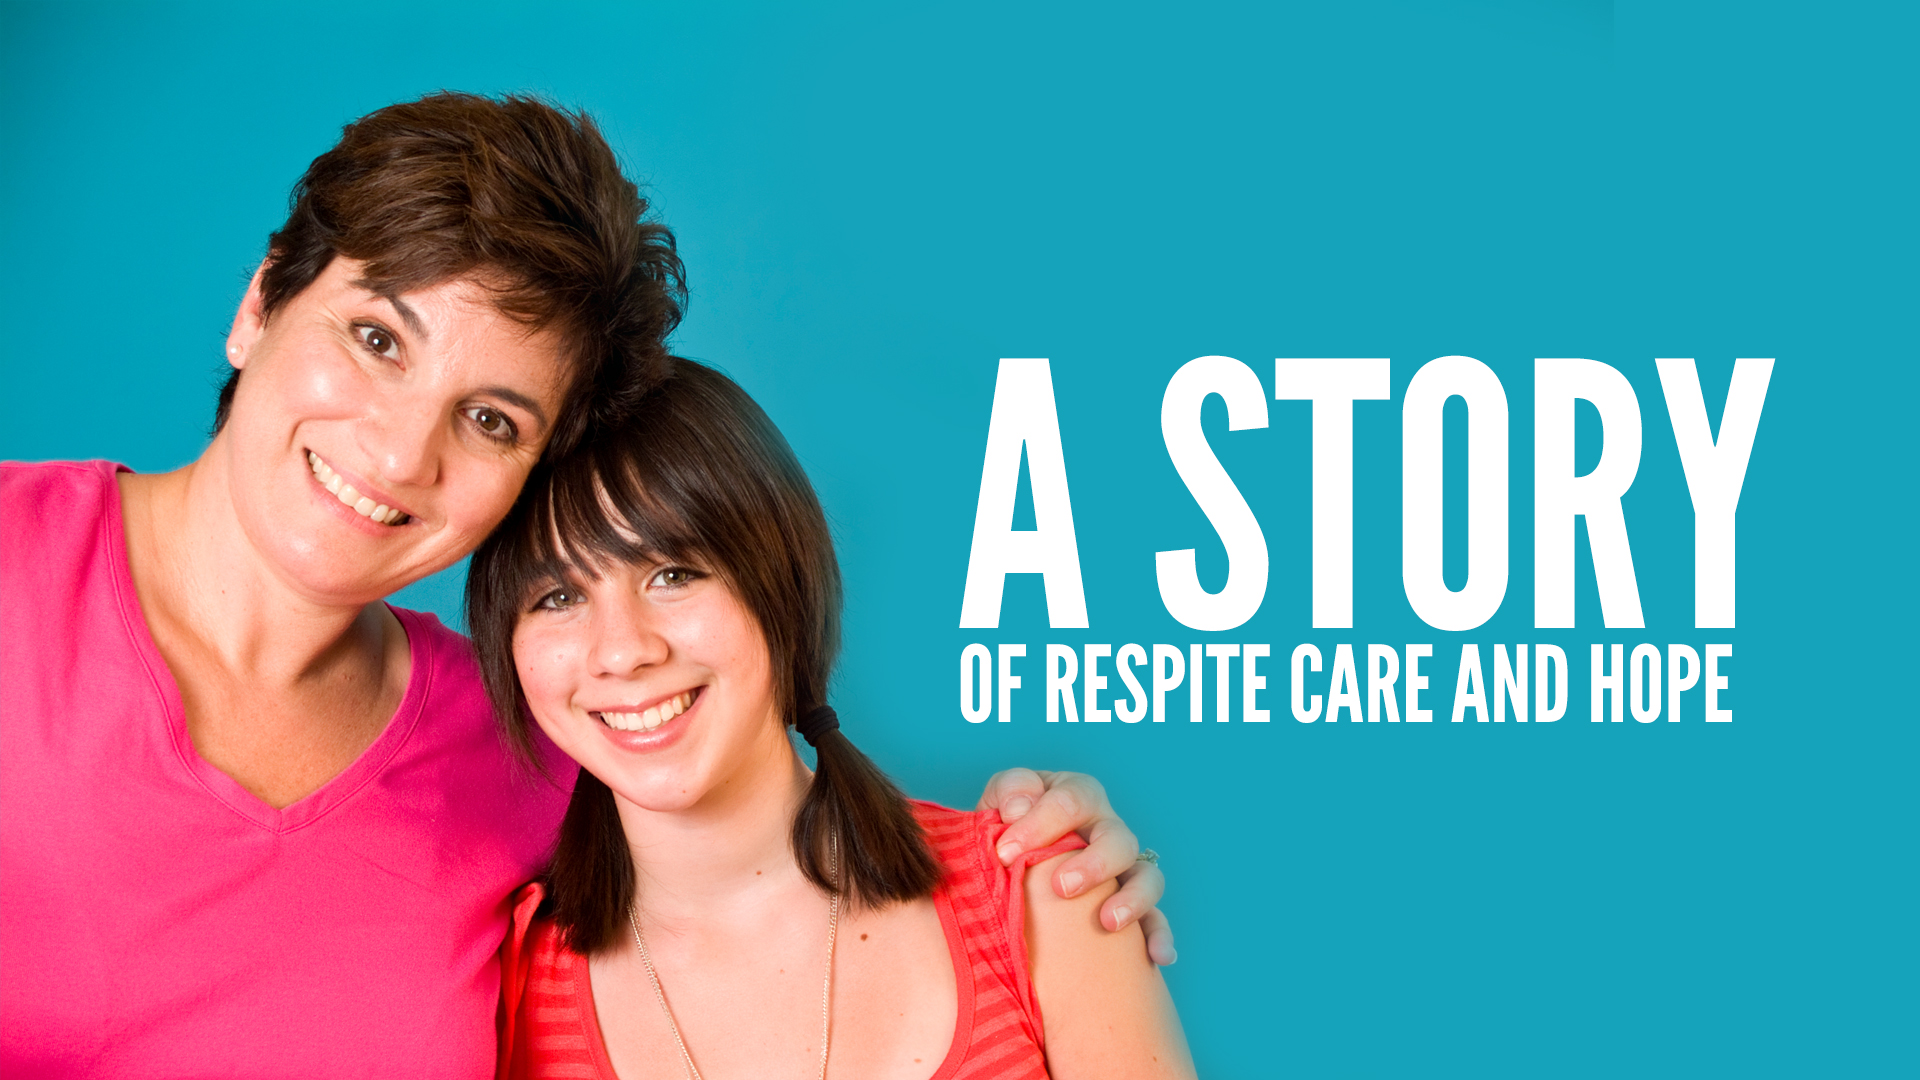 A Story of Respite Care and Hope